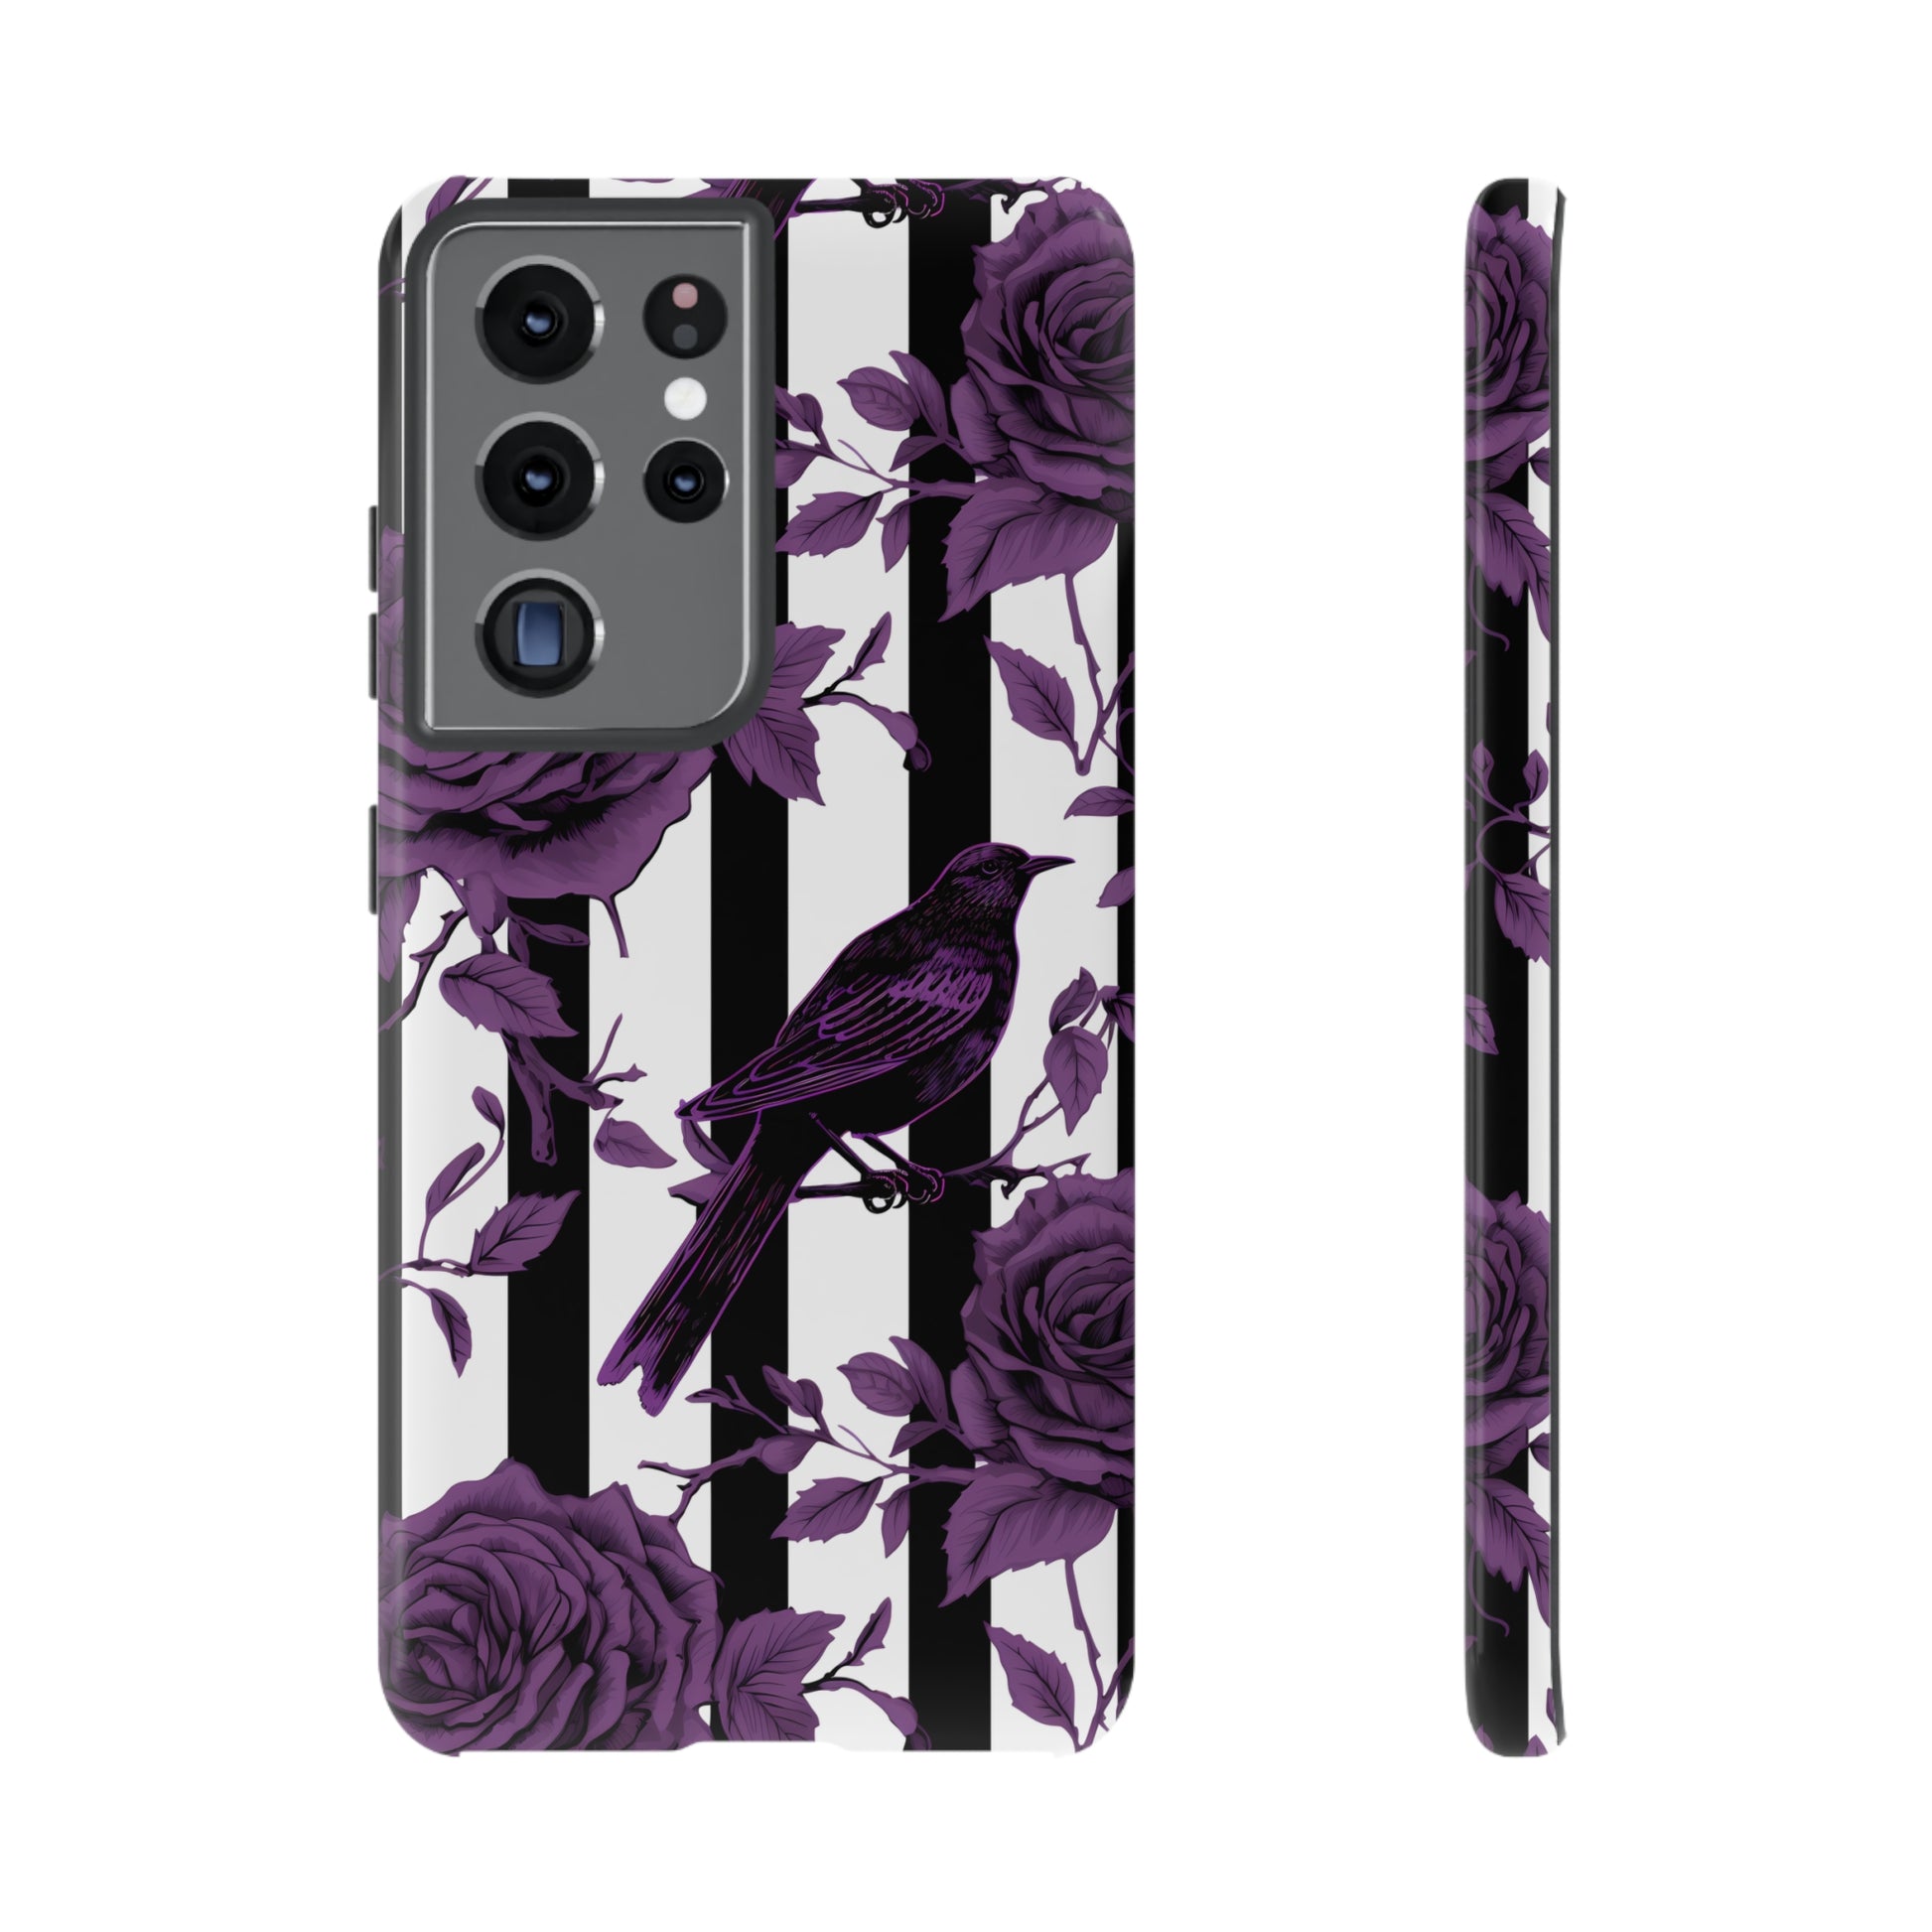 Striped Crows and Roses Tough Cases for iPhone Samsung Google PhonesPhone CaseVTZdesignsSamsung Galaxy S21 UltraGlossyAccessoriescrowsGlossy